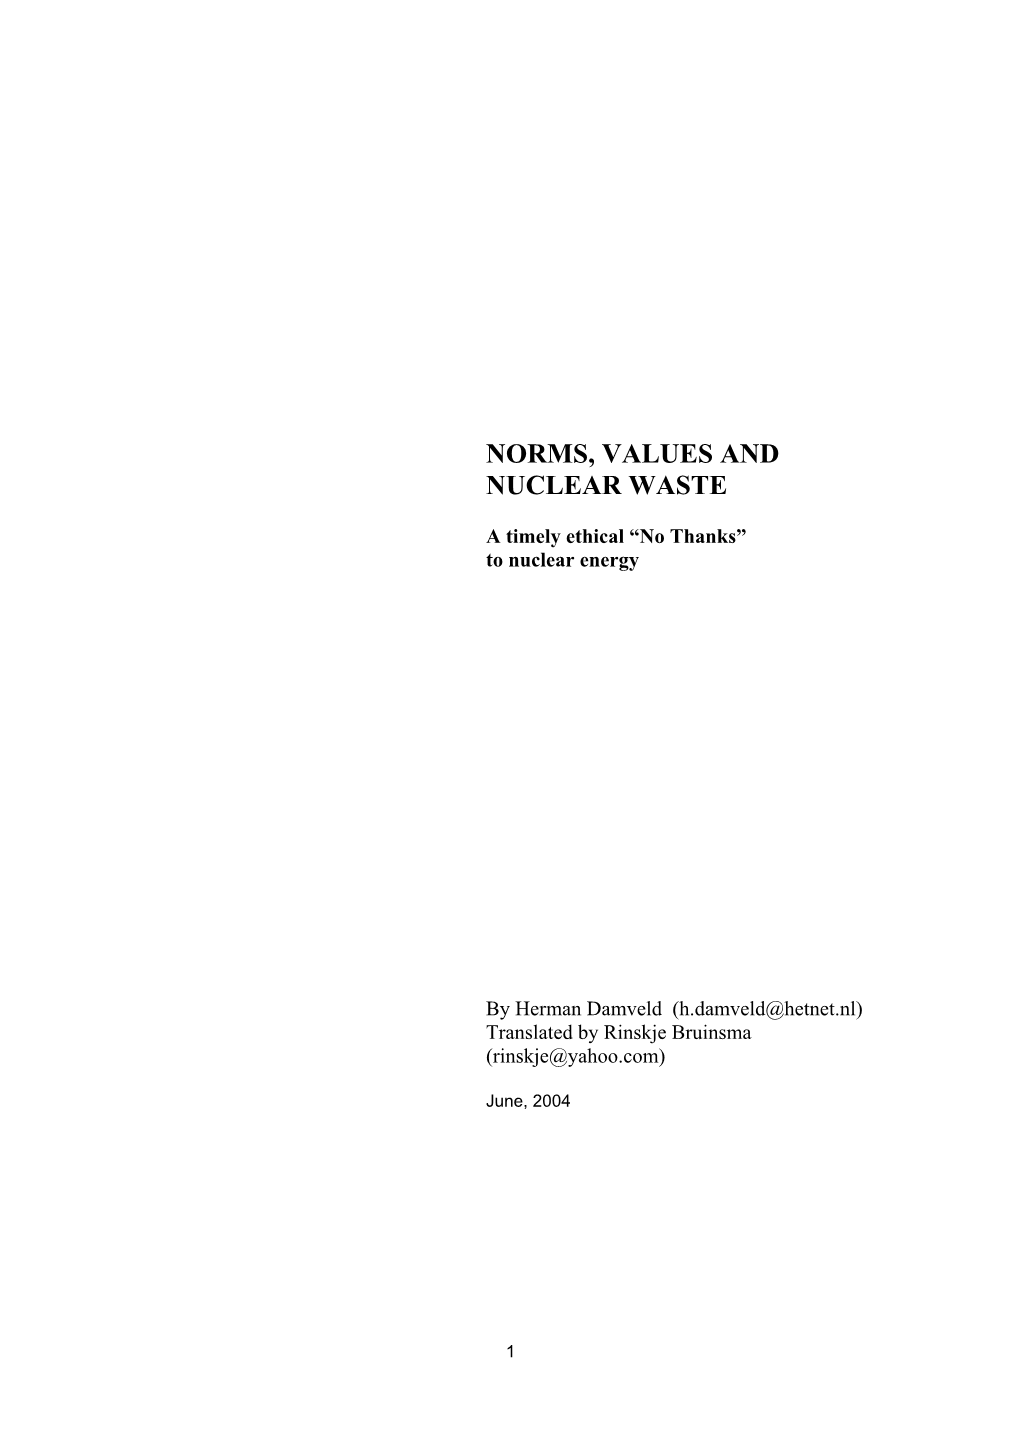 Norms, Values and Nuclear Waste